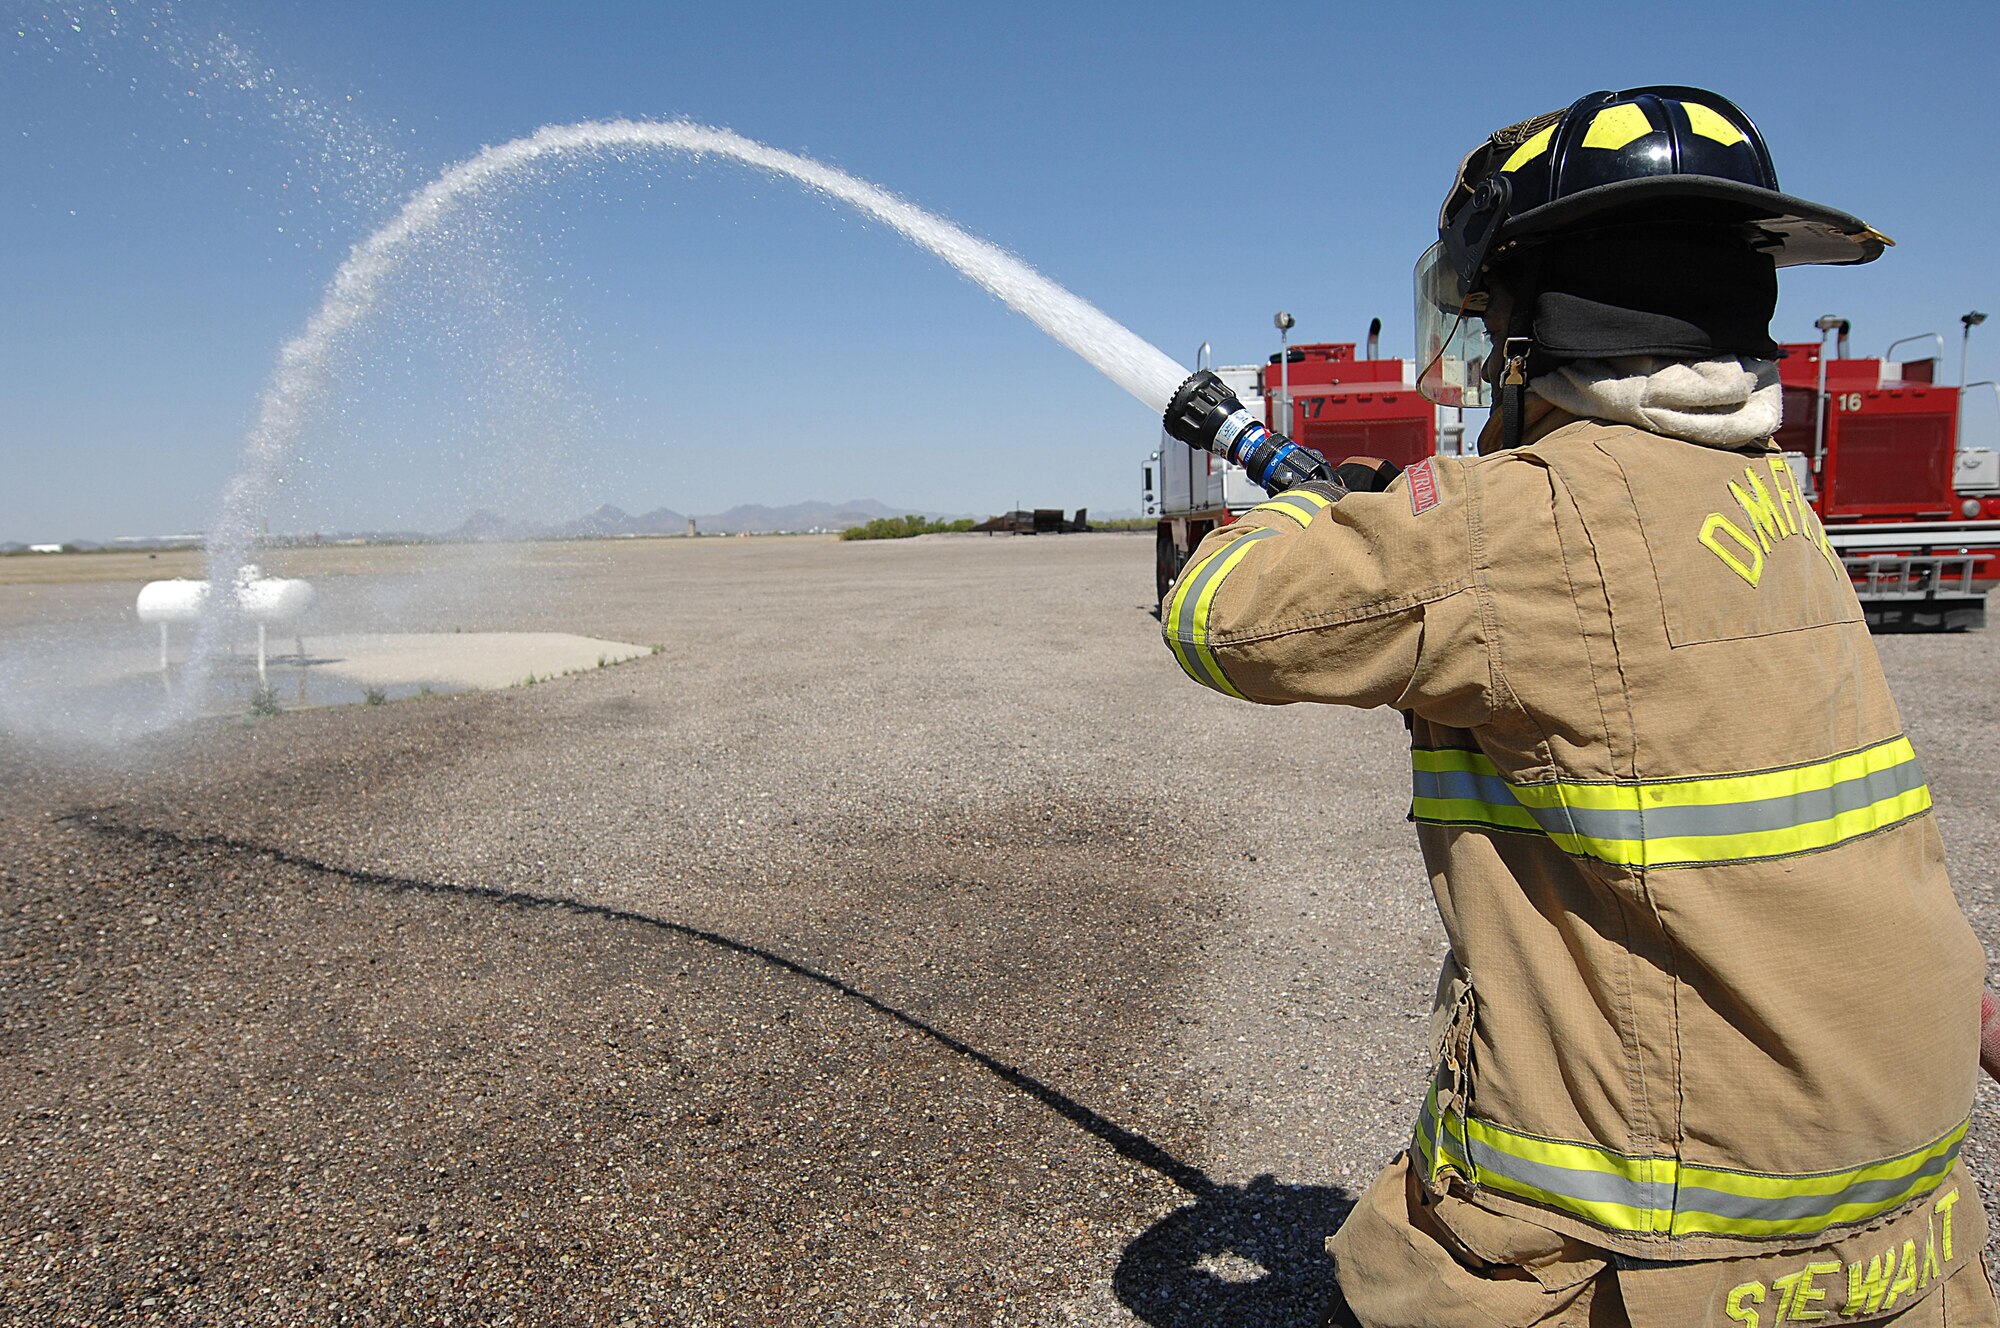 U.S. Air Force Senior Airman Haji Stewart, 355th Civil Engineering Squadron firefighter, participates in a fire attack drill at Davis-Monthan Air Force Base, Ariz., April 19, 2017. D-M firefighters continuously train throughout the week in order to keep their skills honed. (U.S. Air Force photo by Airman 1st Class Frankie Moore)